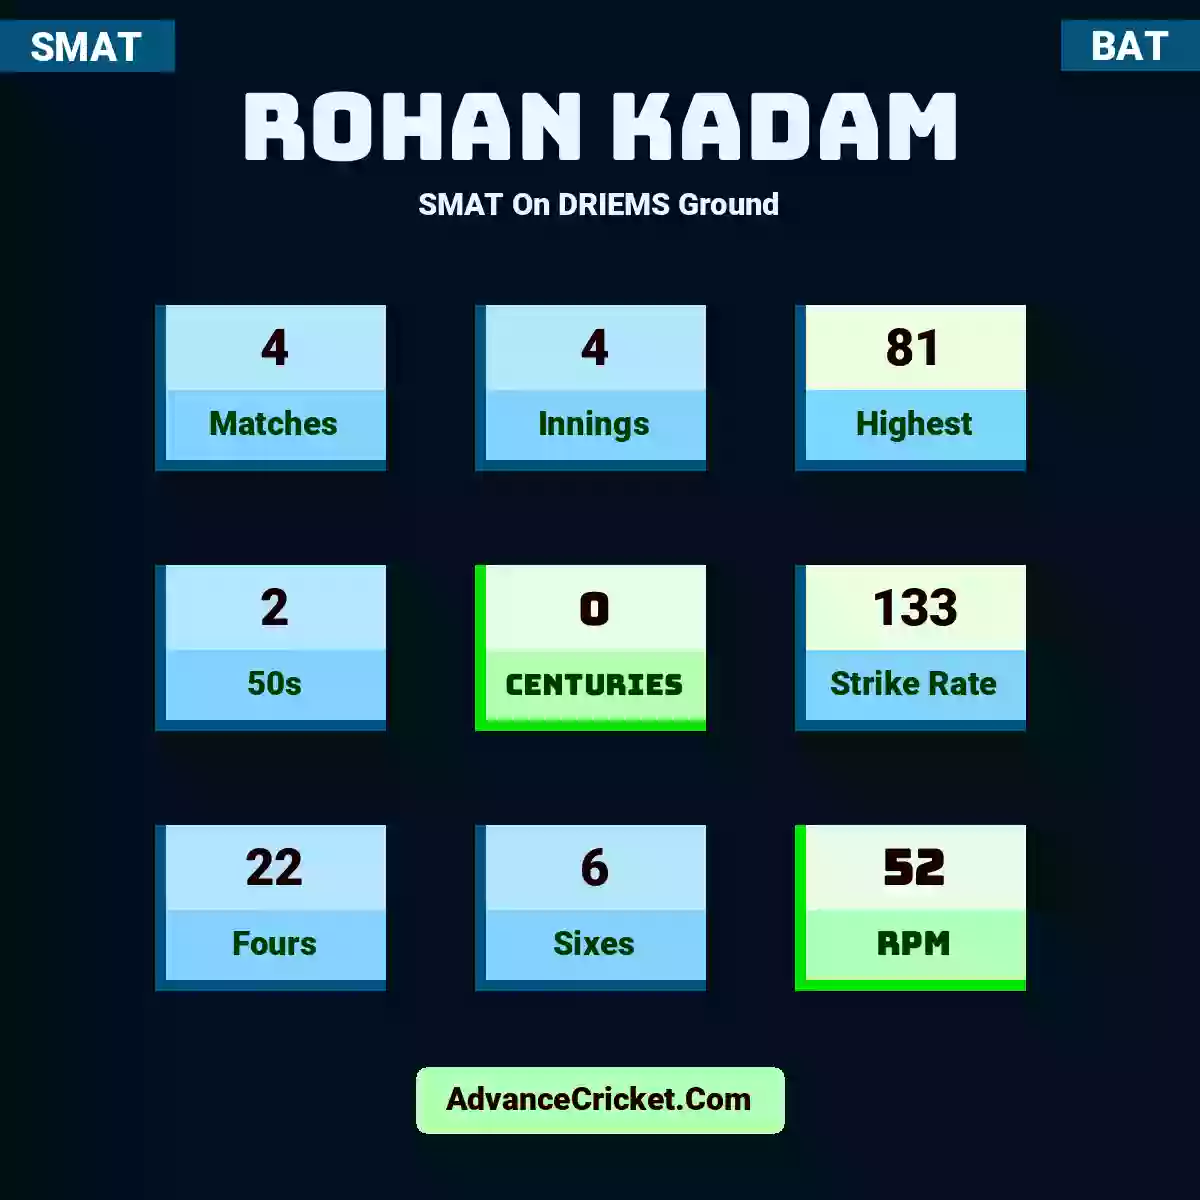 Rohan Kadam SMAT  On DRIEMS Ground, Rohan Kadam played 4 matches, scored 81 runs as highest, 2 half-centuries, and 0 centuries, with a strike rate of 133. R.Kadam hit 22 fours and 6 sixes, with an RPM of 52.